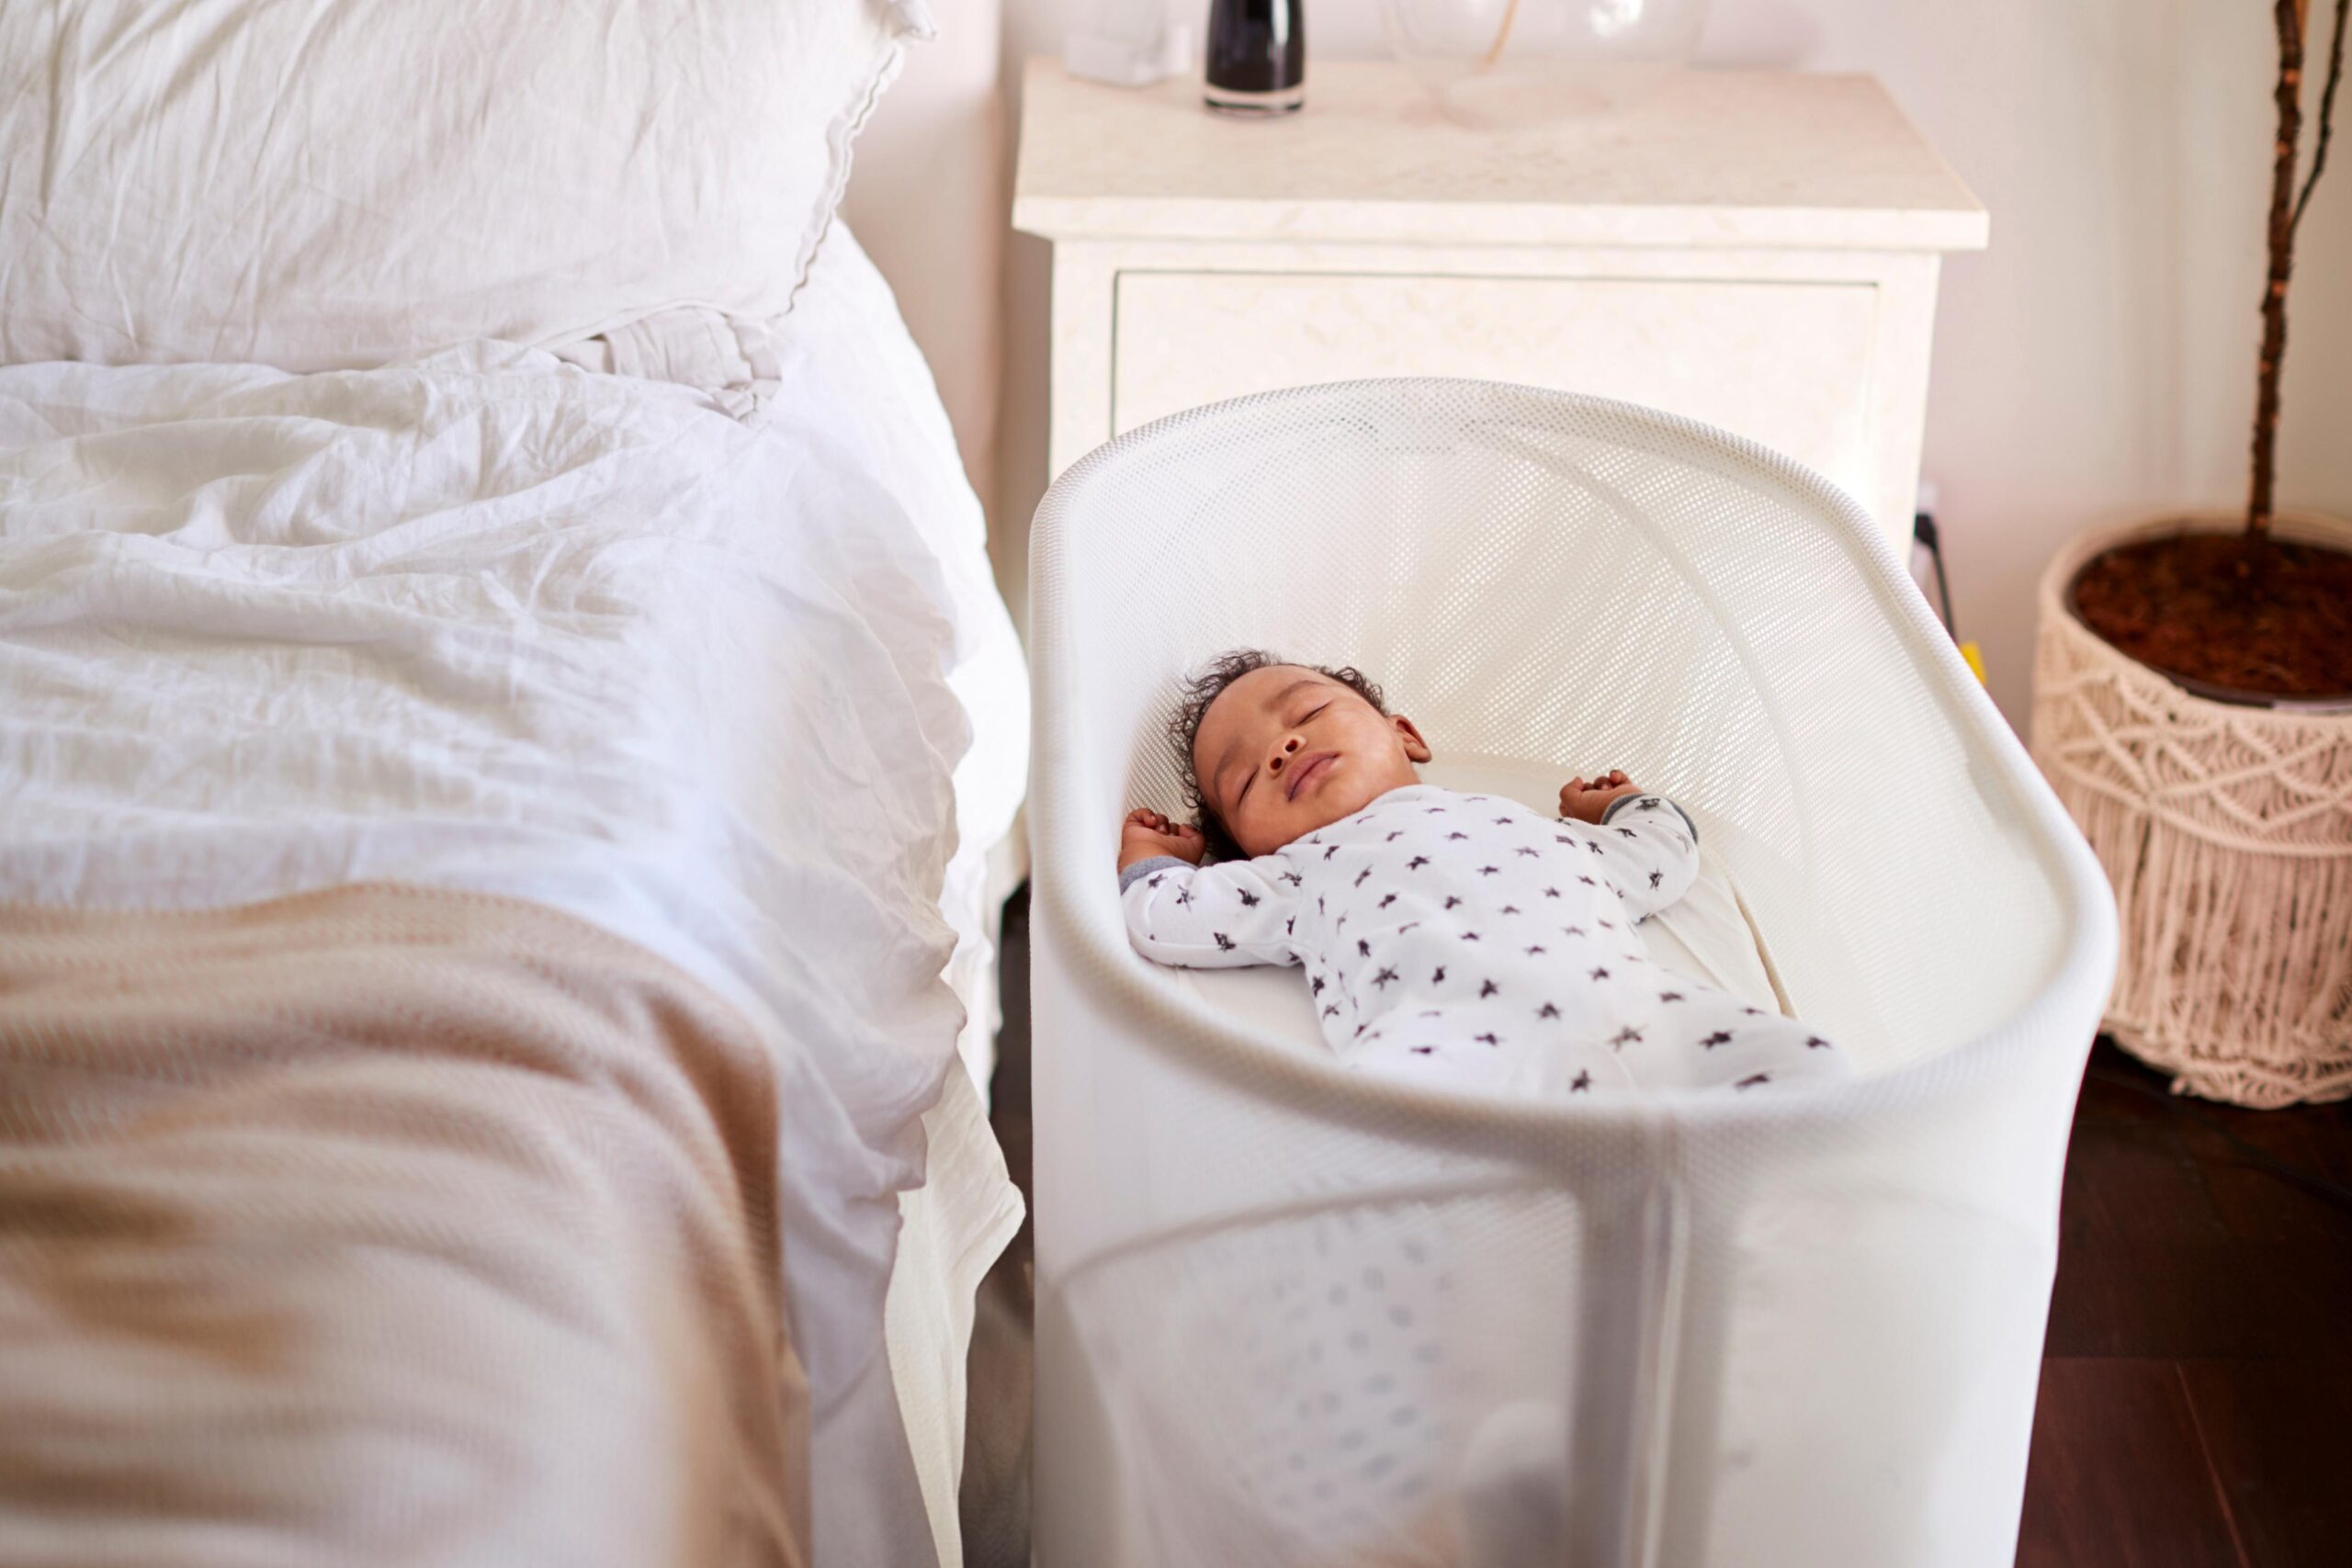 A newborn baby sleeping in a bassinet next to a bed.